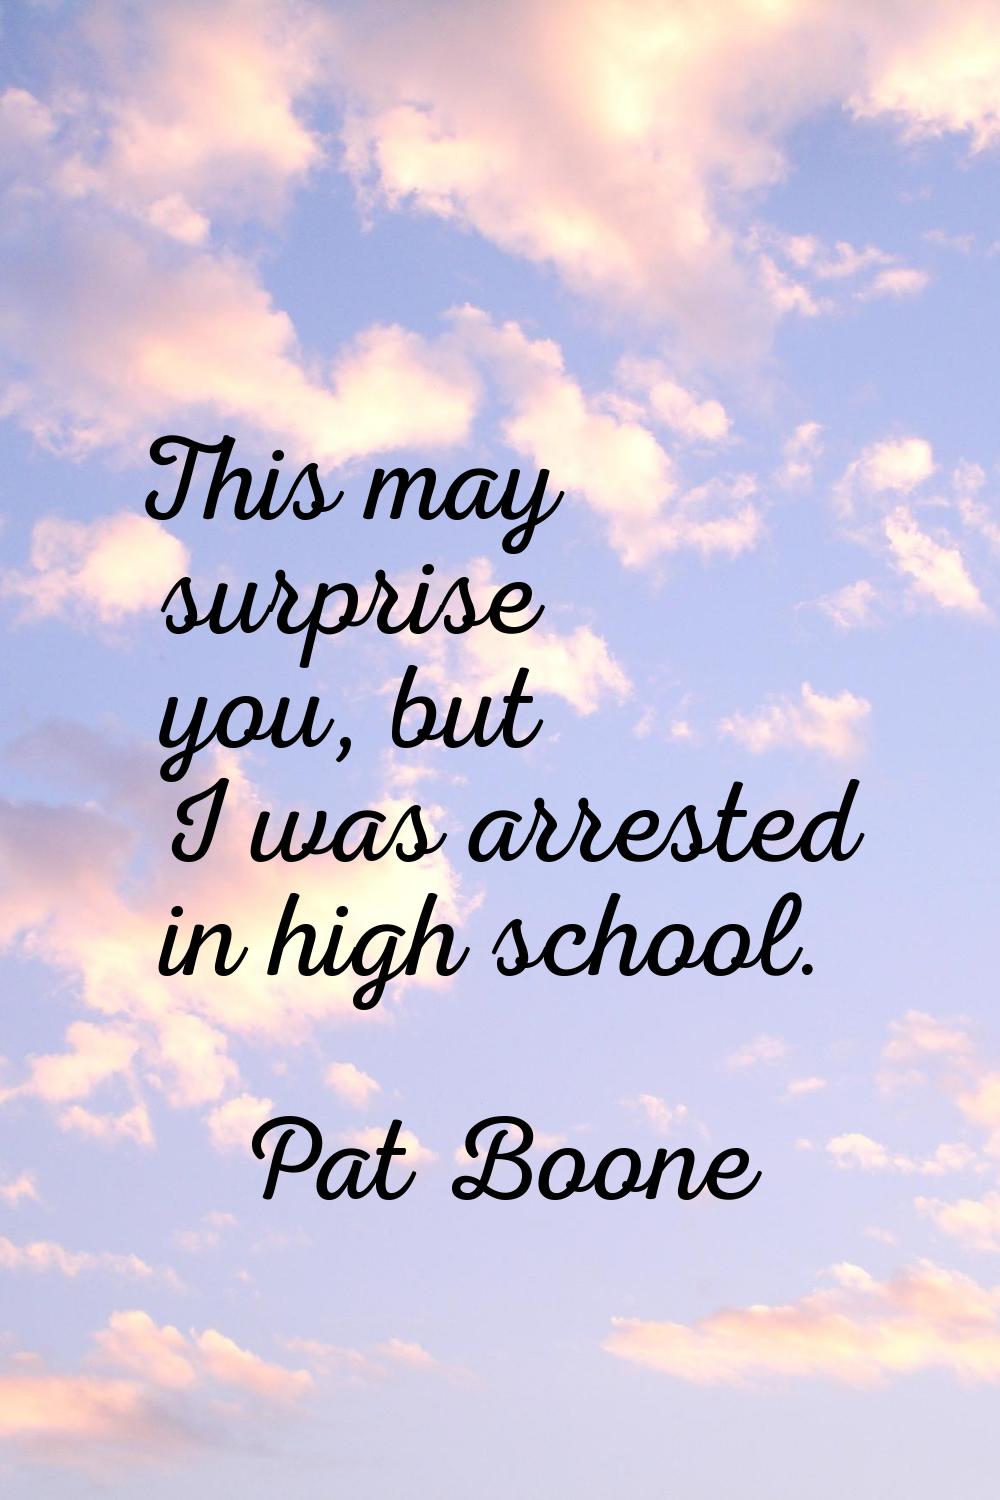 This may surprise you, but I was arrested in high school.